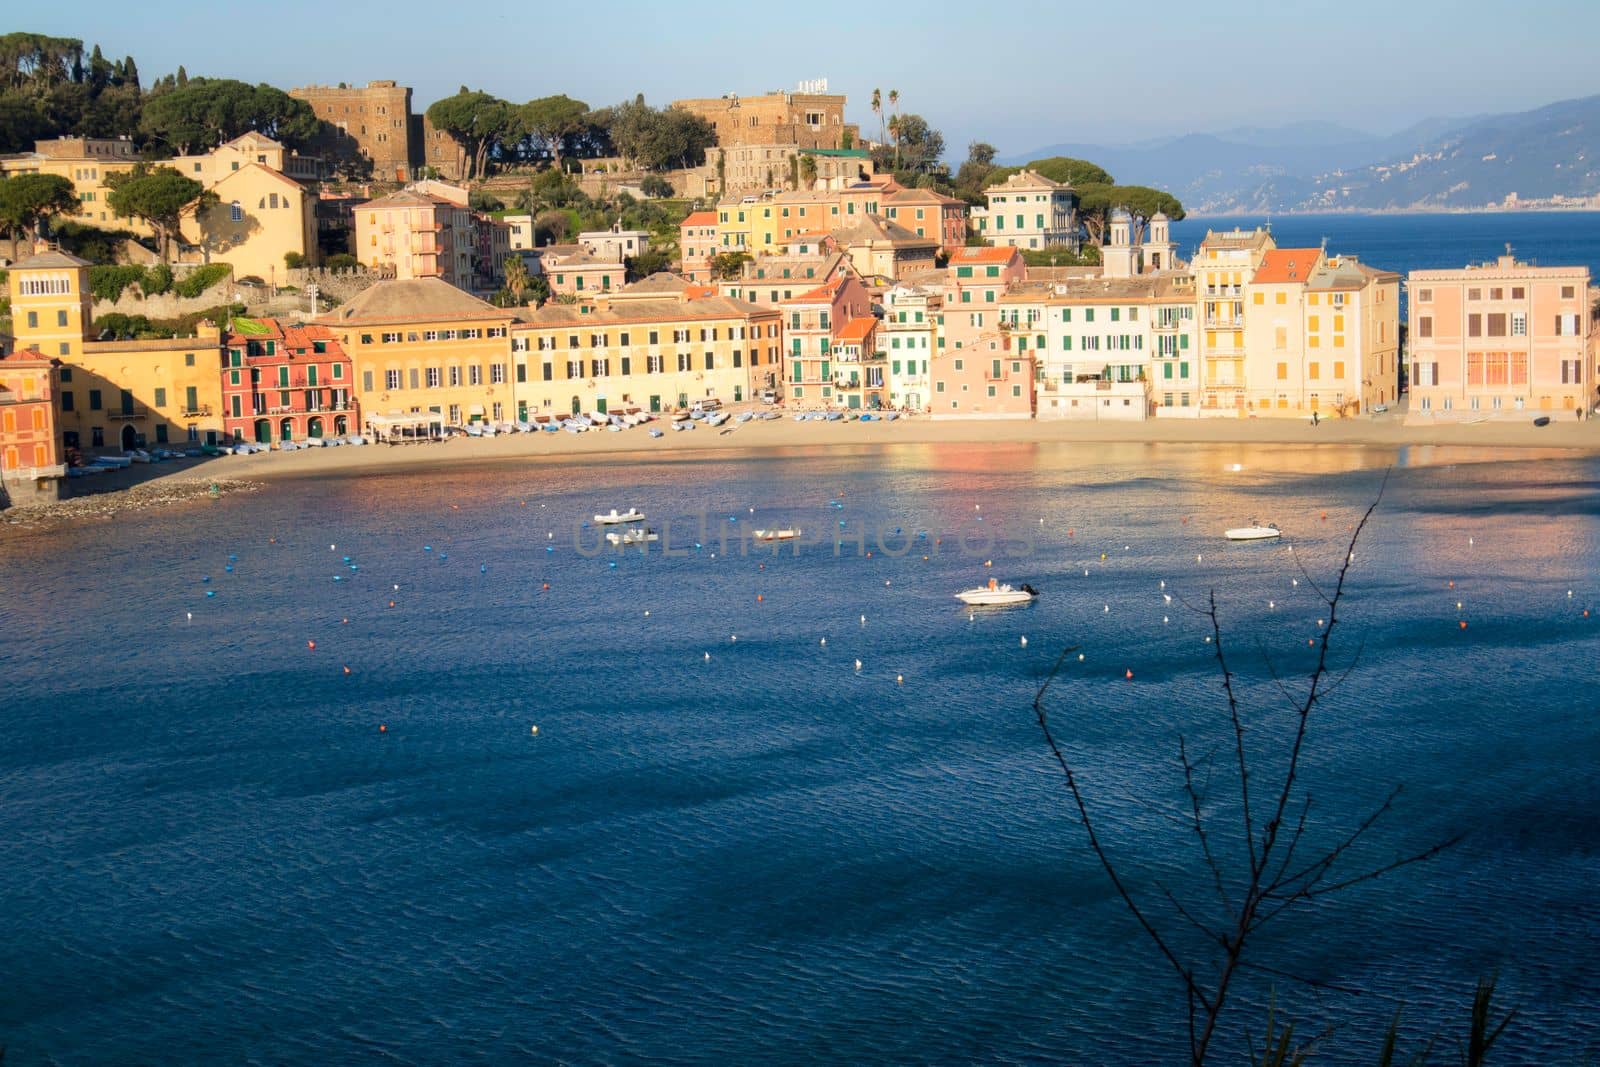 Sunrise view of the Bay of Silence in Sestri Levante Italy  by fotografiche.eu